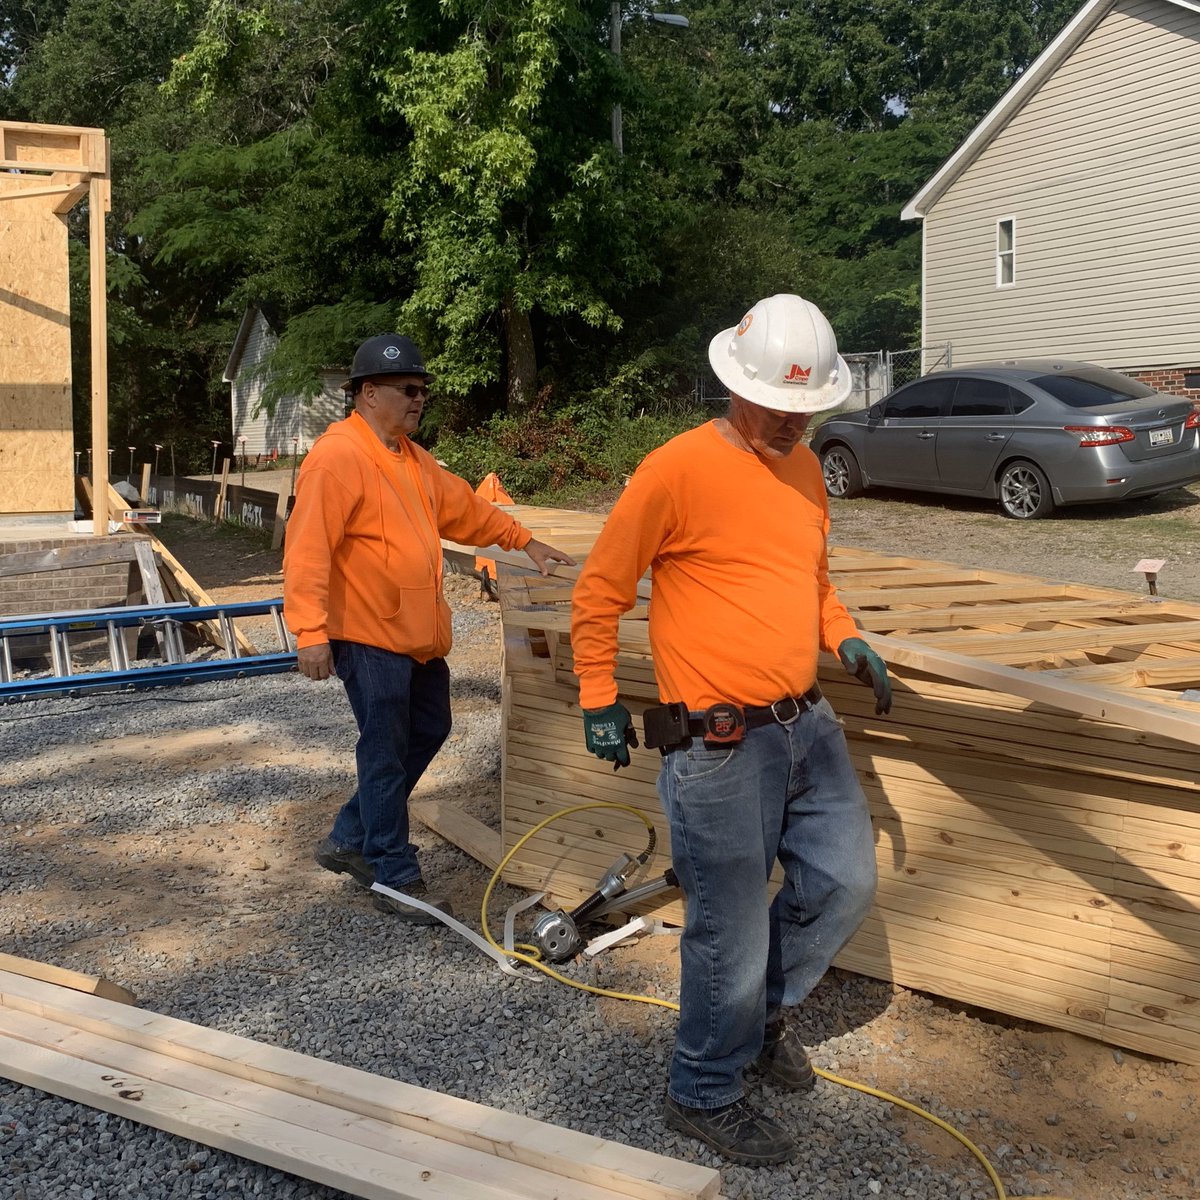 We had another great day with @YCHabitat earlier this week. Working on these houses is truly one of the best & most rewarding things we do at J.M. Cope! 🏠

#JMCope #CopeCommunity #HabitatForHumanity #HomeIsTheKey